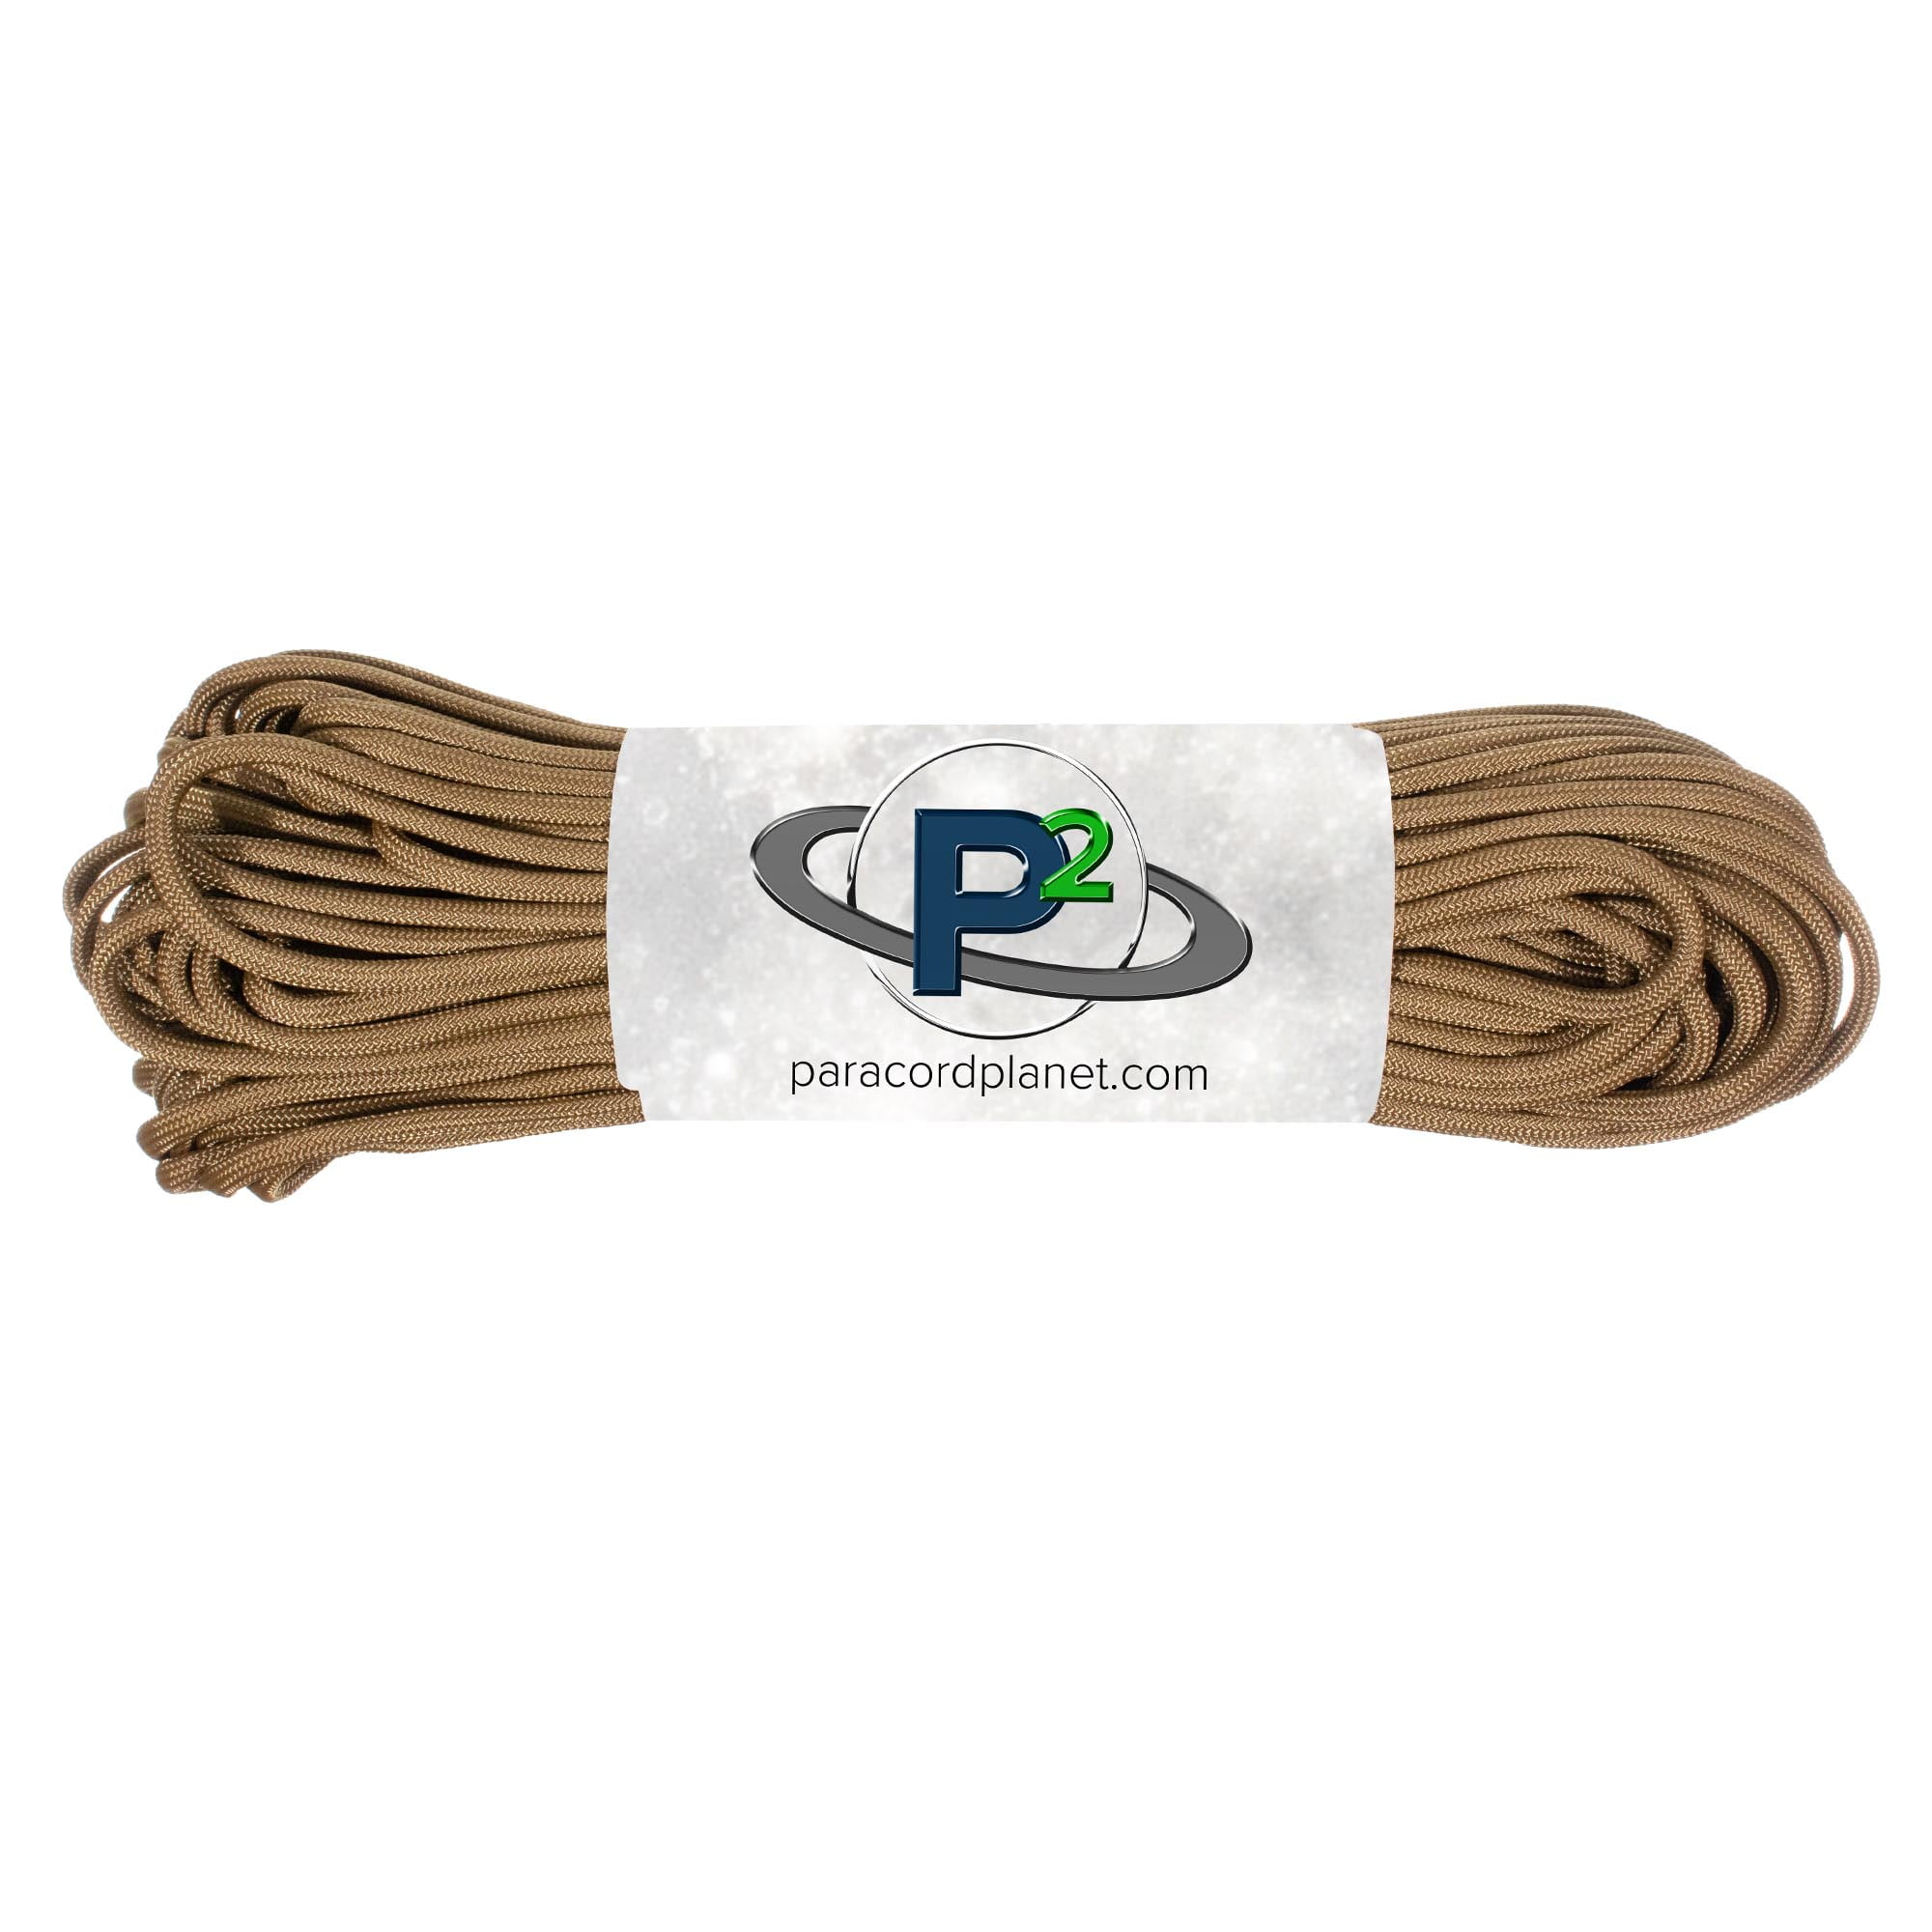 PARACORD PLANET 250-1000 Spools of Parachute Cord ParacordPlanet Type III Military Specification 550 